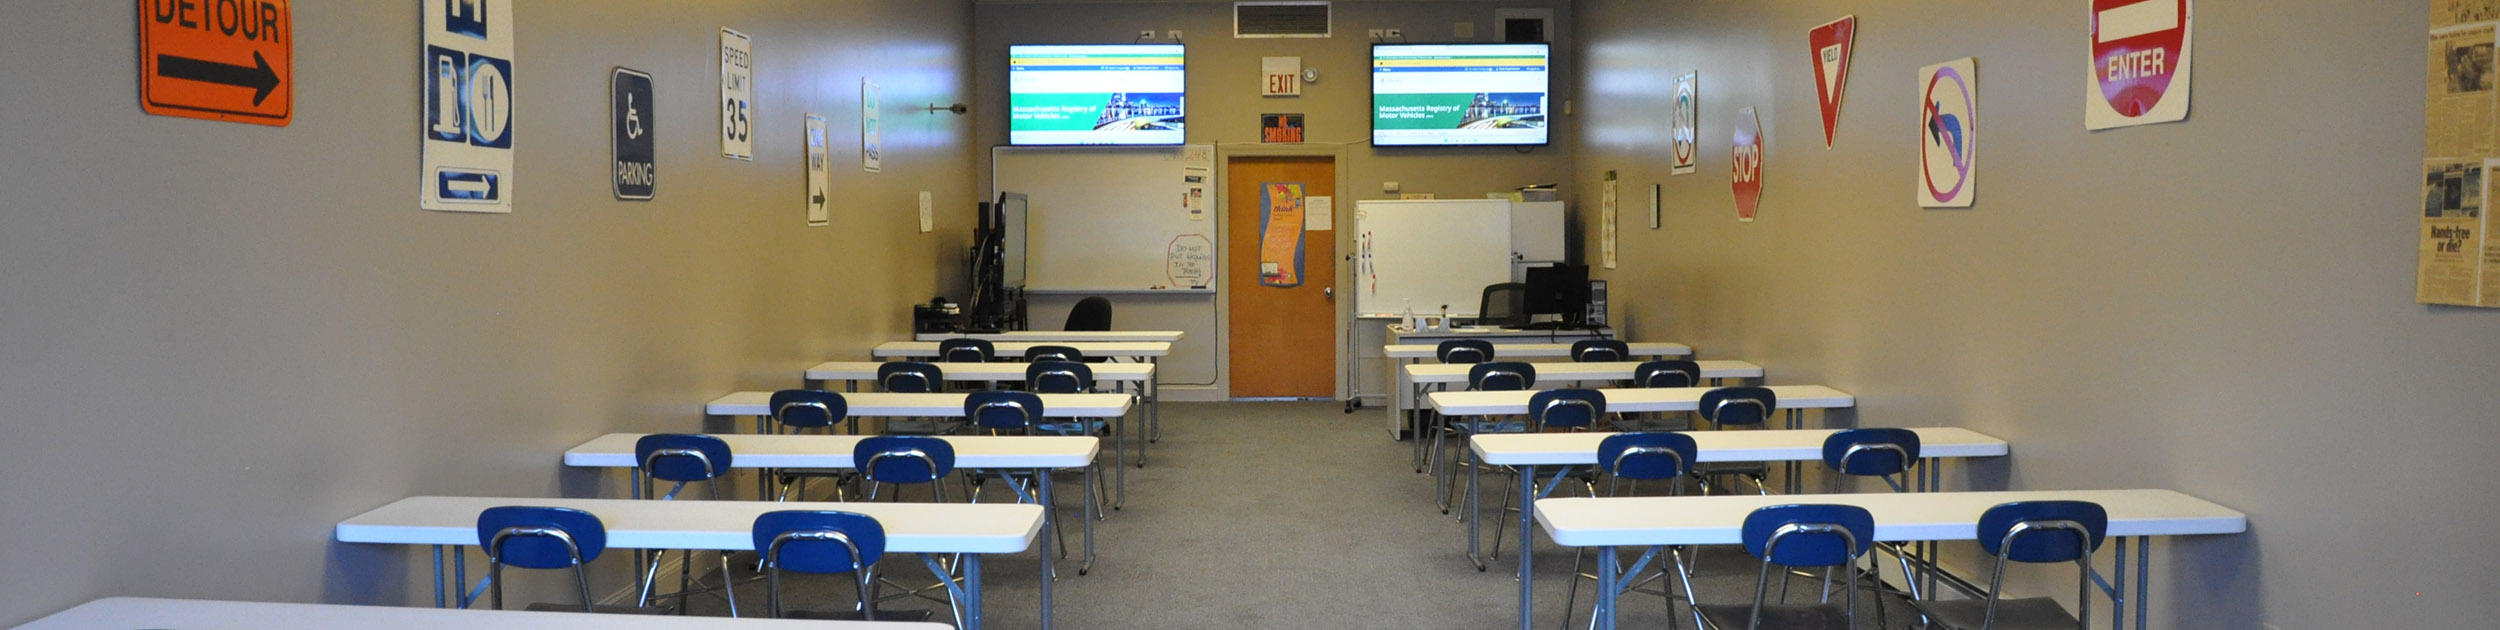 Inside look at the classroom at Mr. K's Auto School